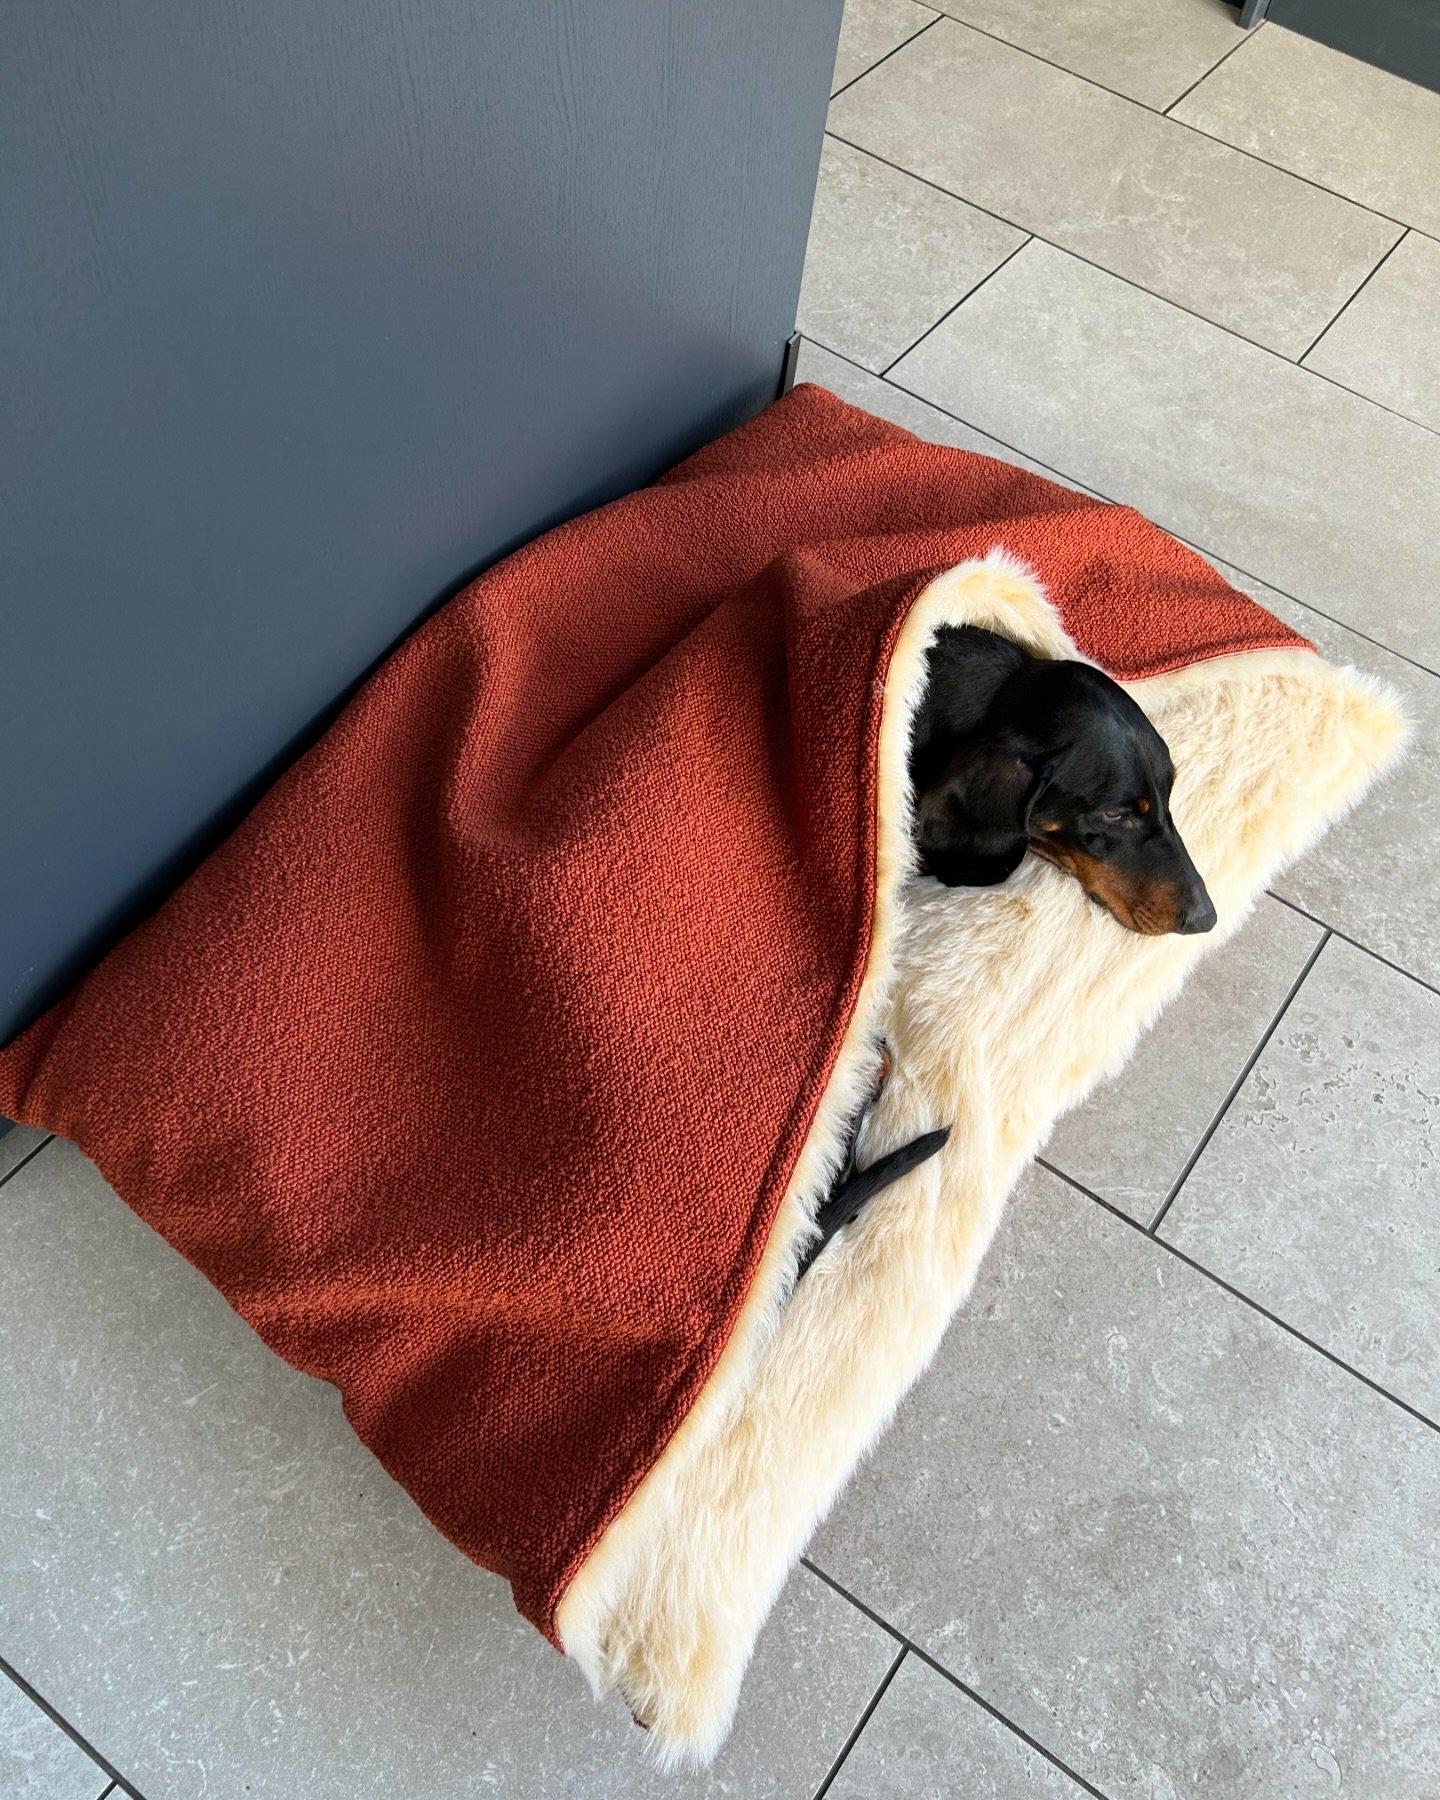 They say that every business should have at least one viral product, a product when someone says their business name- their customers automatically think of
THIS ⬆️ is ours 🥰
.
.
#thesausagepit #snugglebed #cavebed #dogbed #luxurydogbed #dachshund #